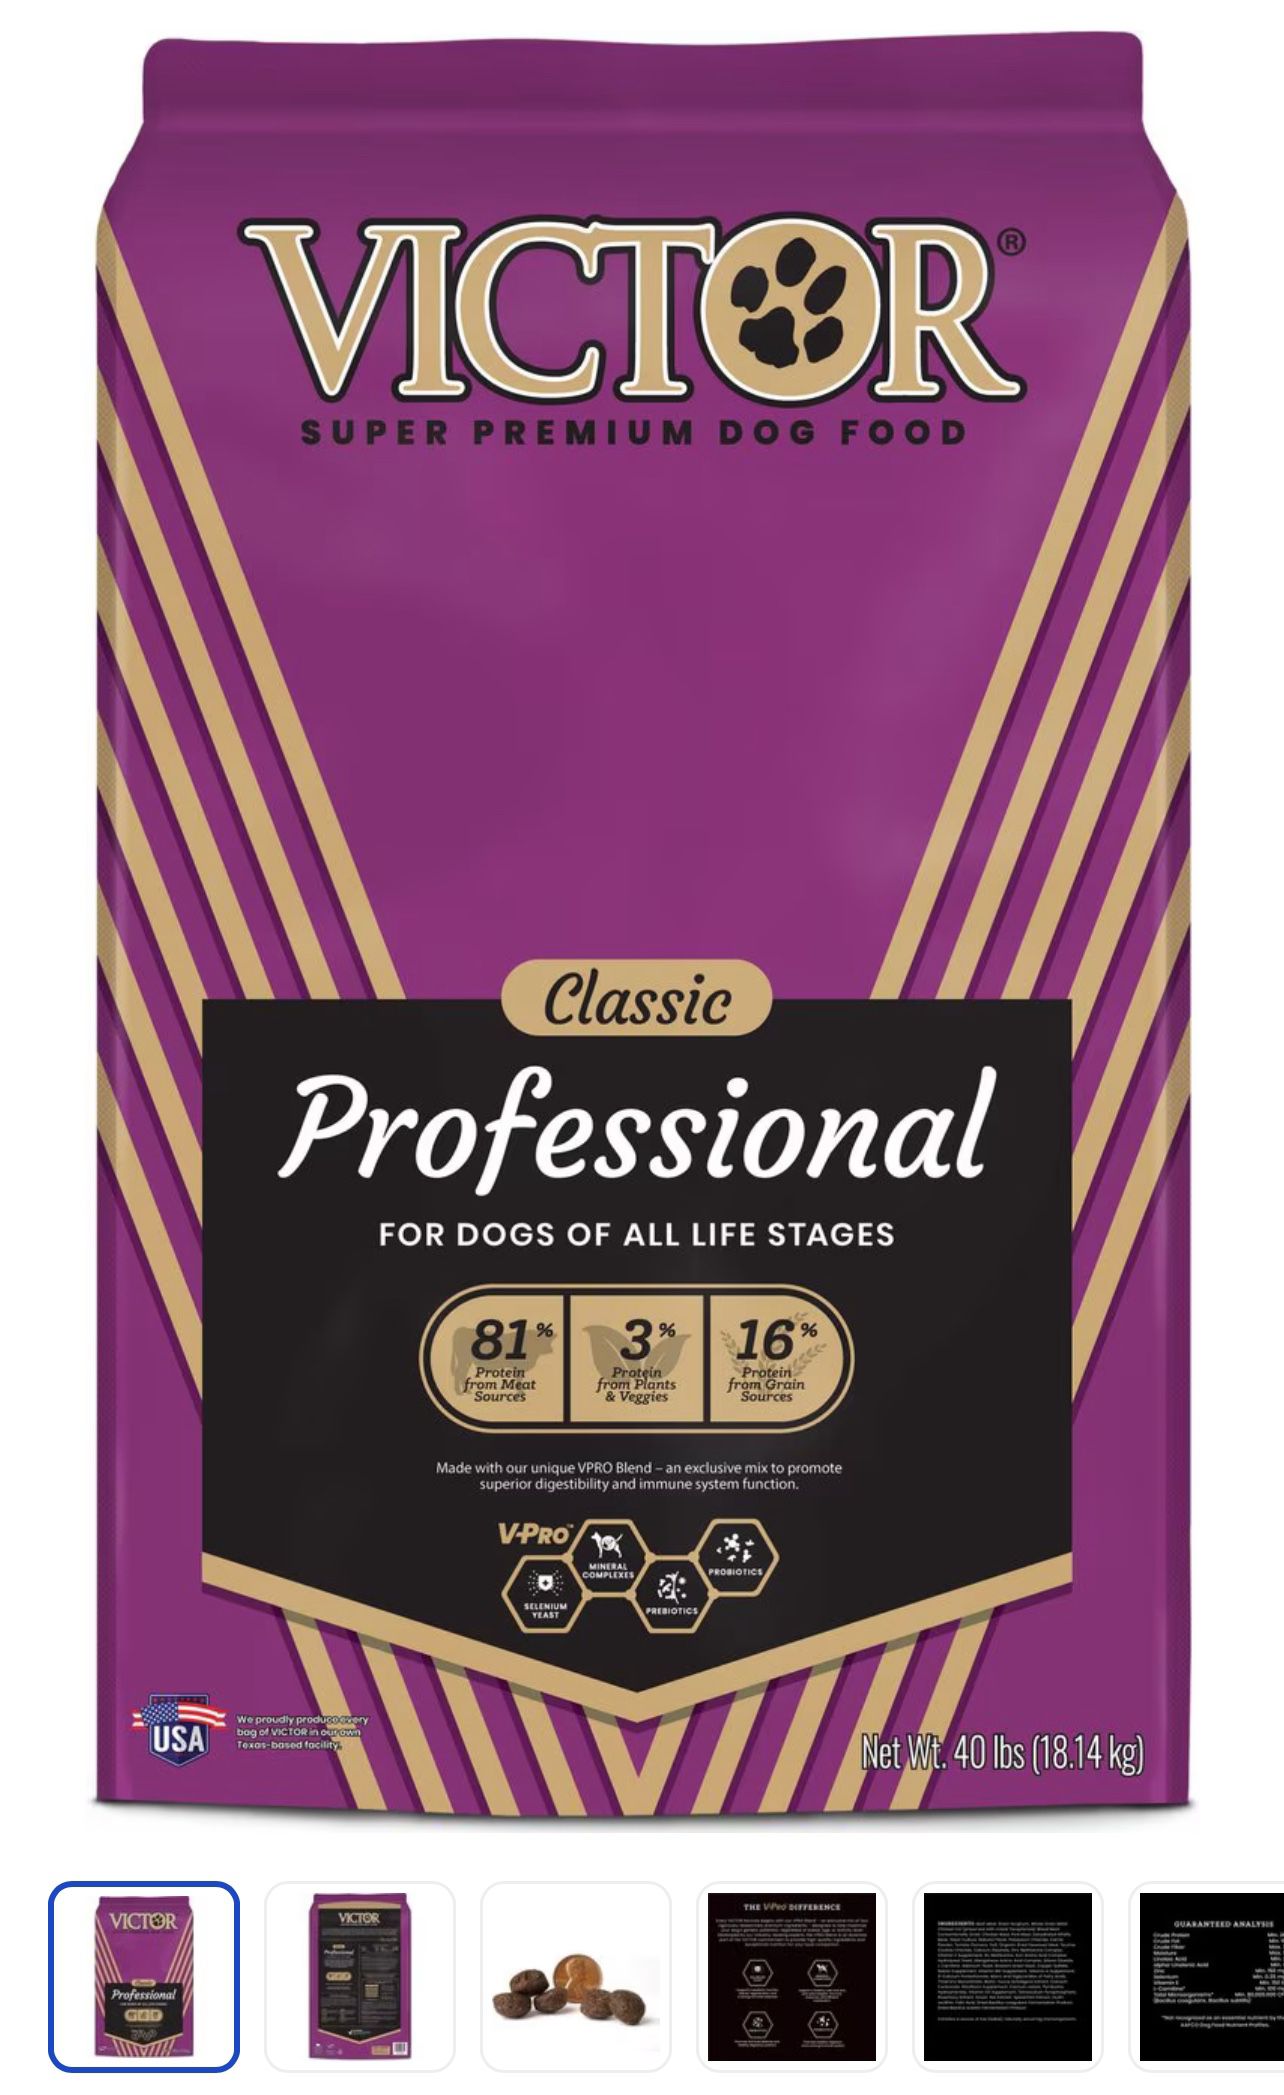 Voictor Professional Dog Food